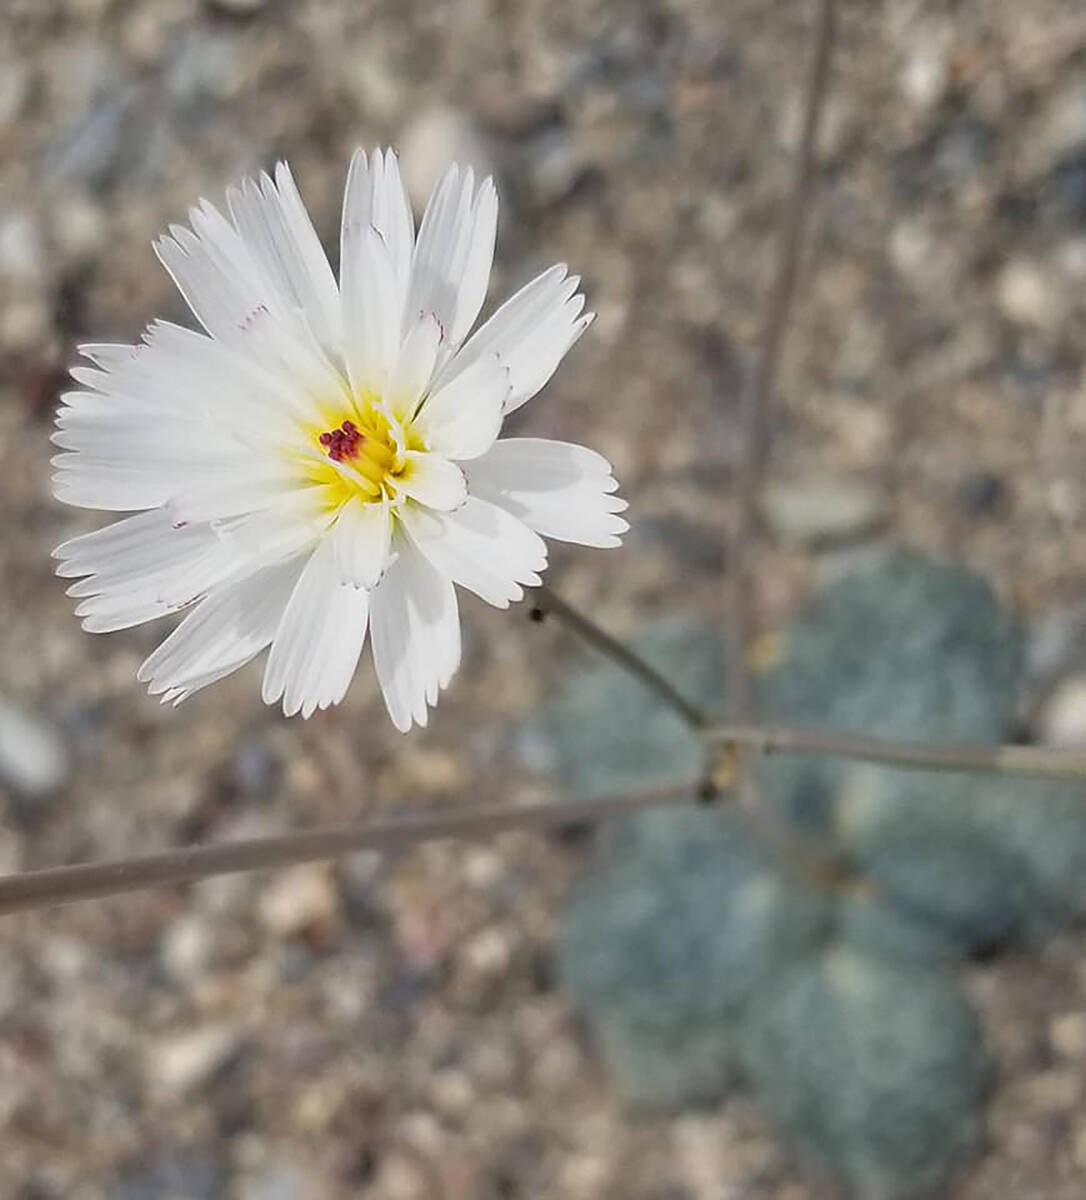 A superbloom is not in the 2023 forecast for Death Valley, but in good wildflower years the gra ...